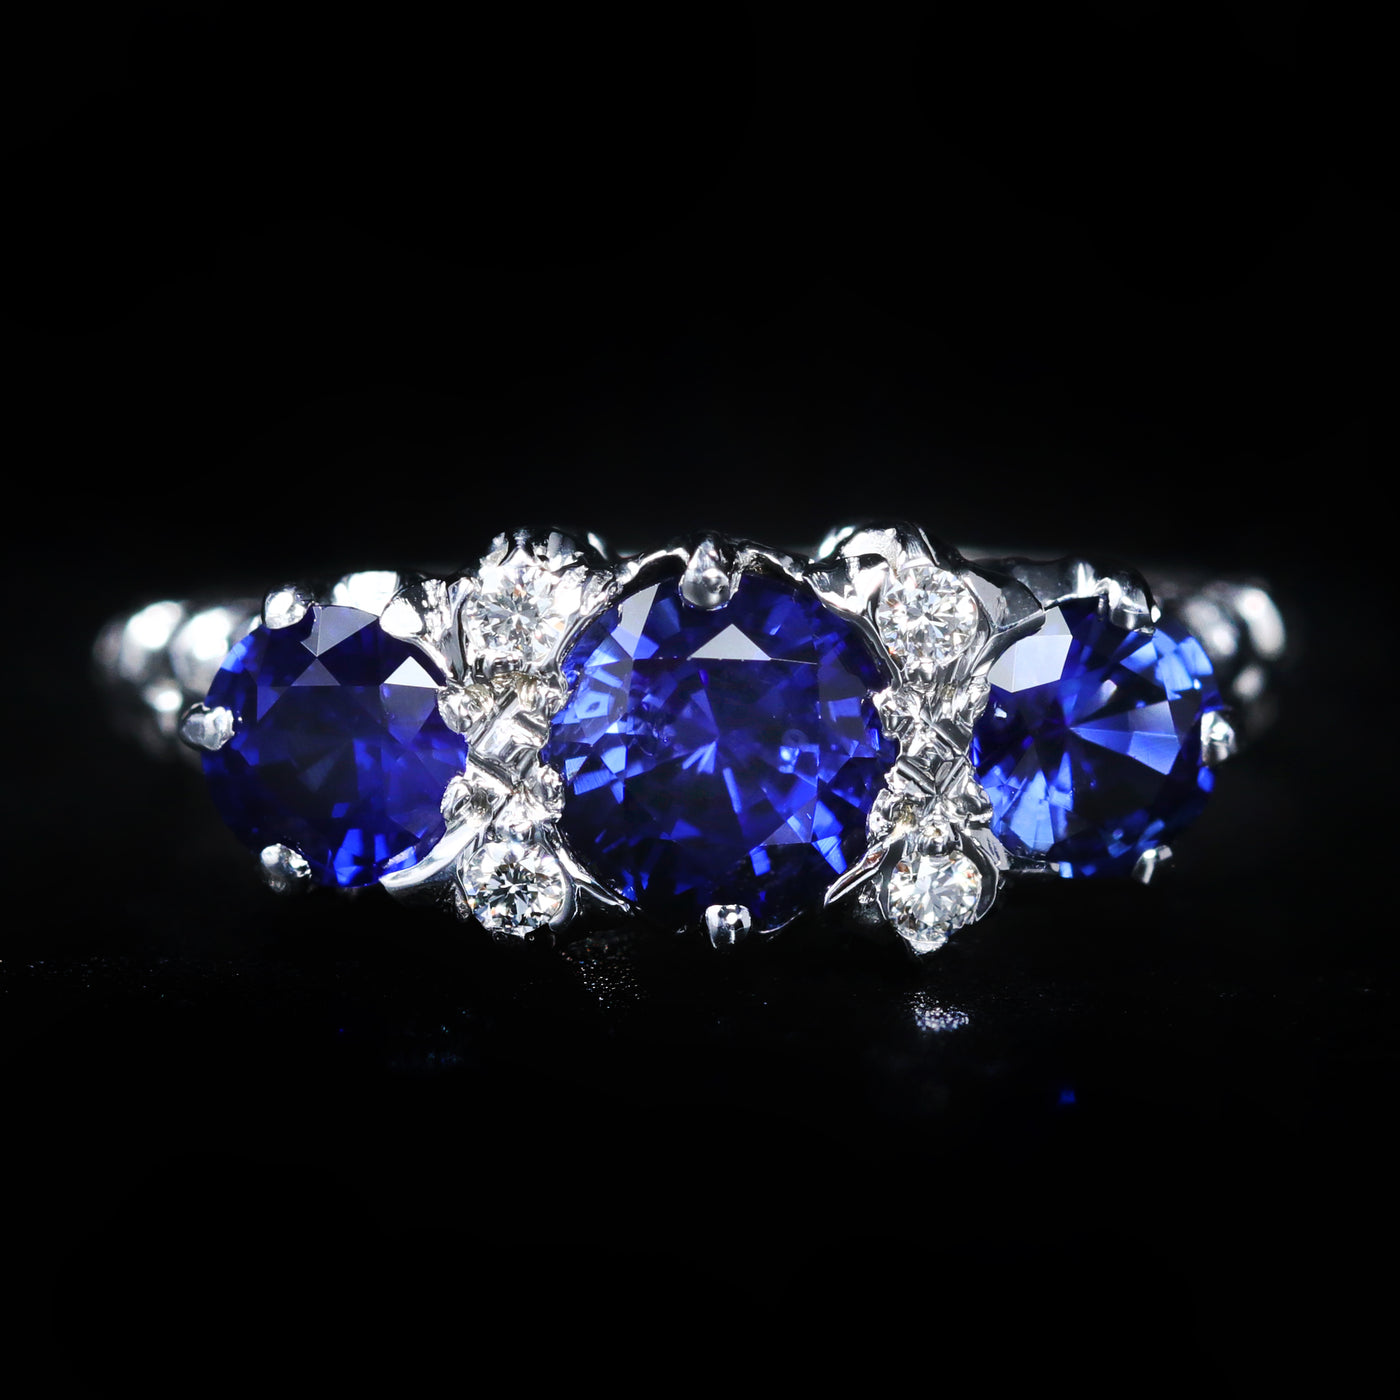 14K White Gold 1.74 CTW Sapphire and Diamond Ring